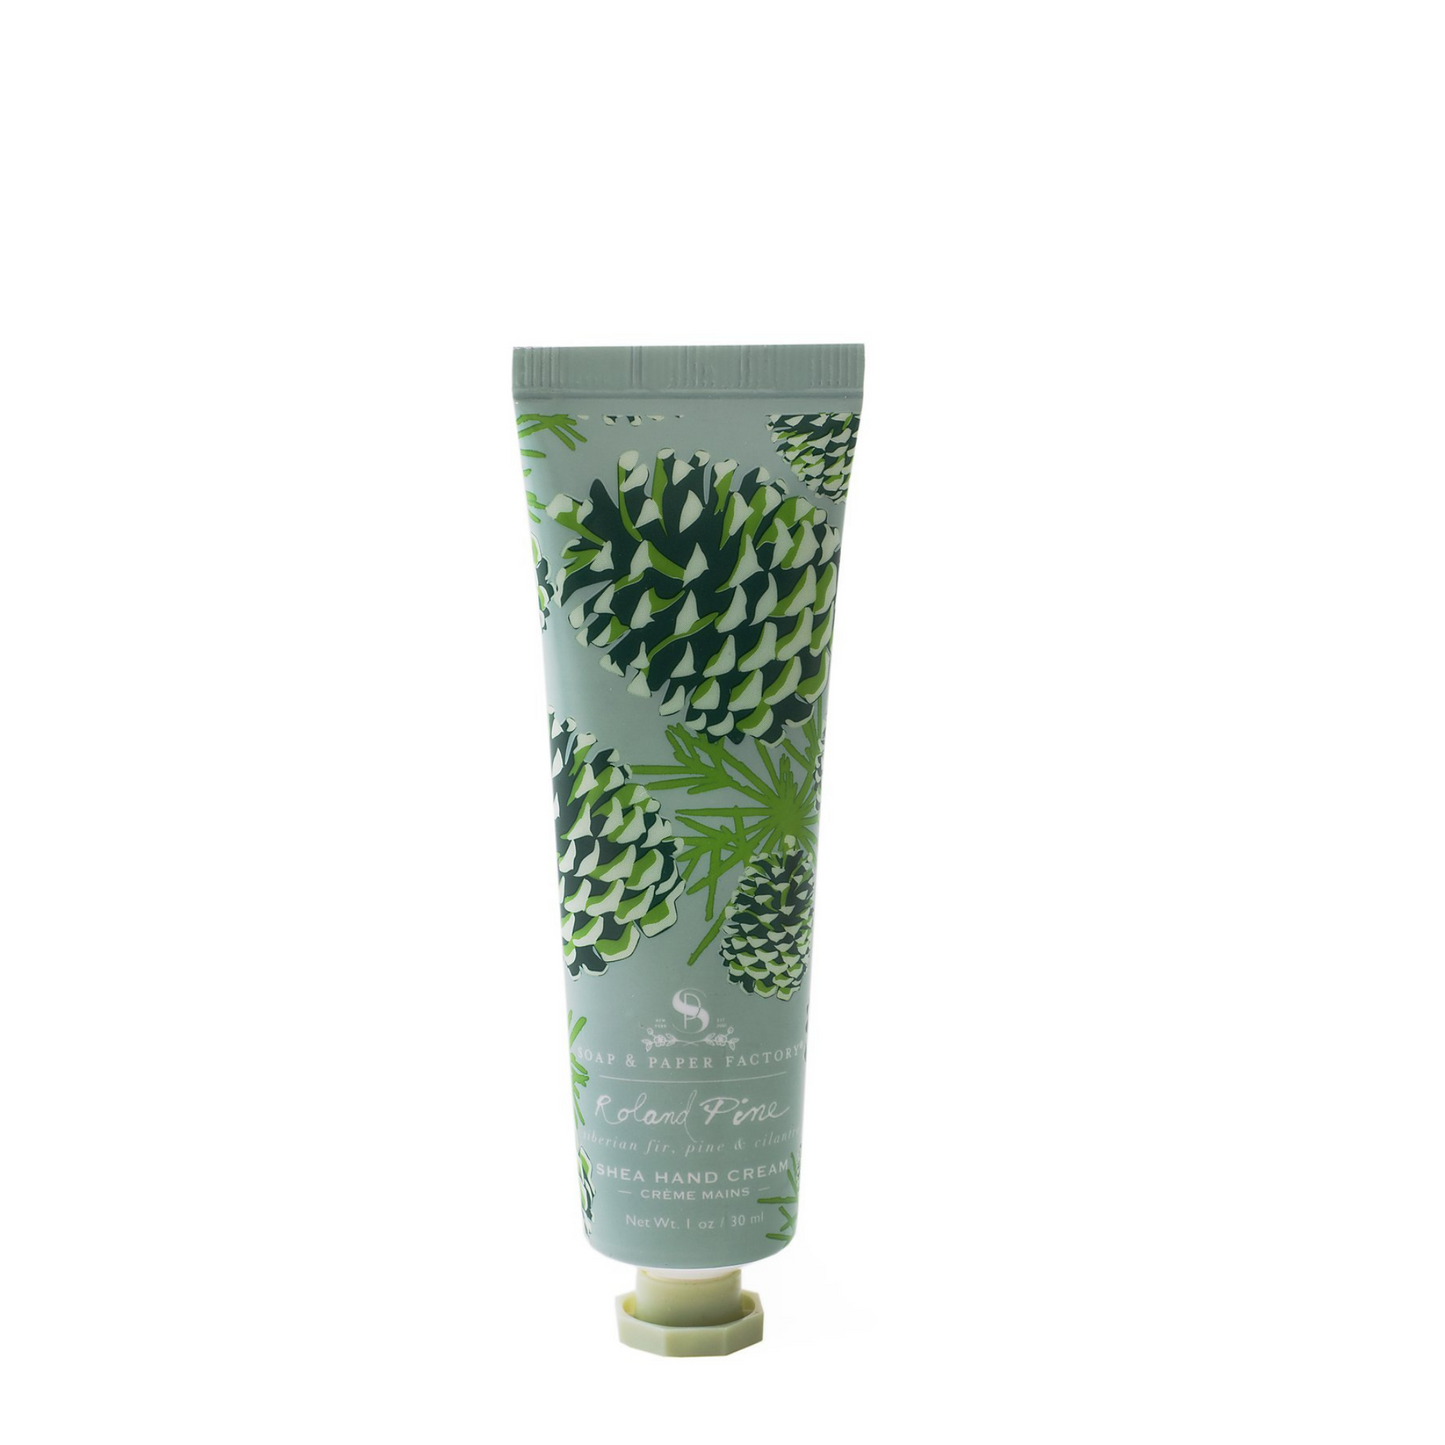 Primary Image of Roland Pine Shea Butter Hand Cream